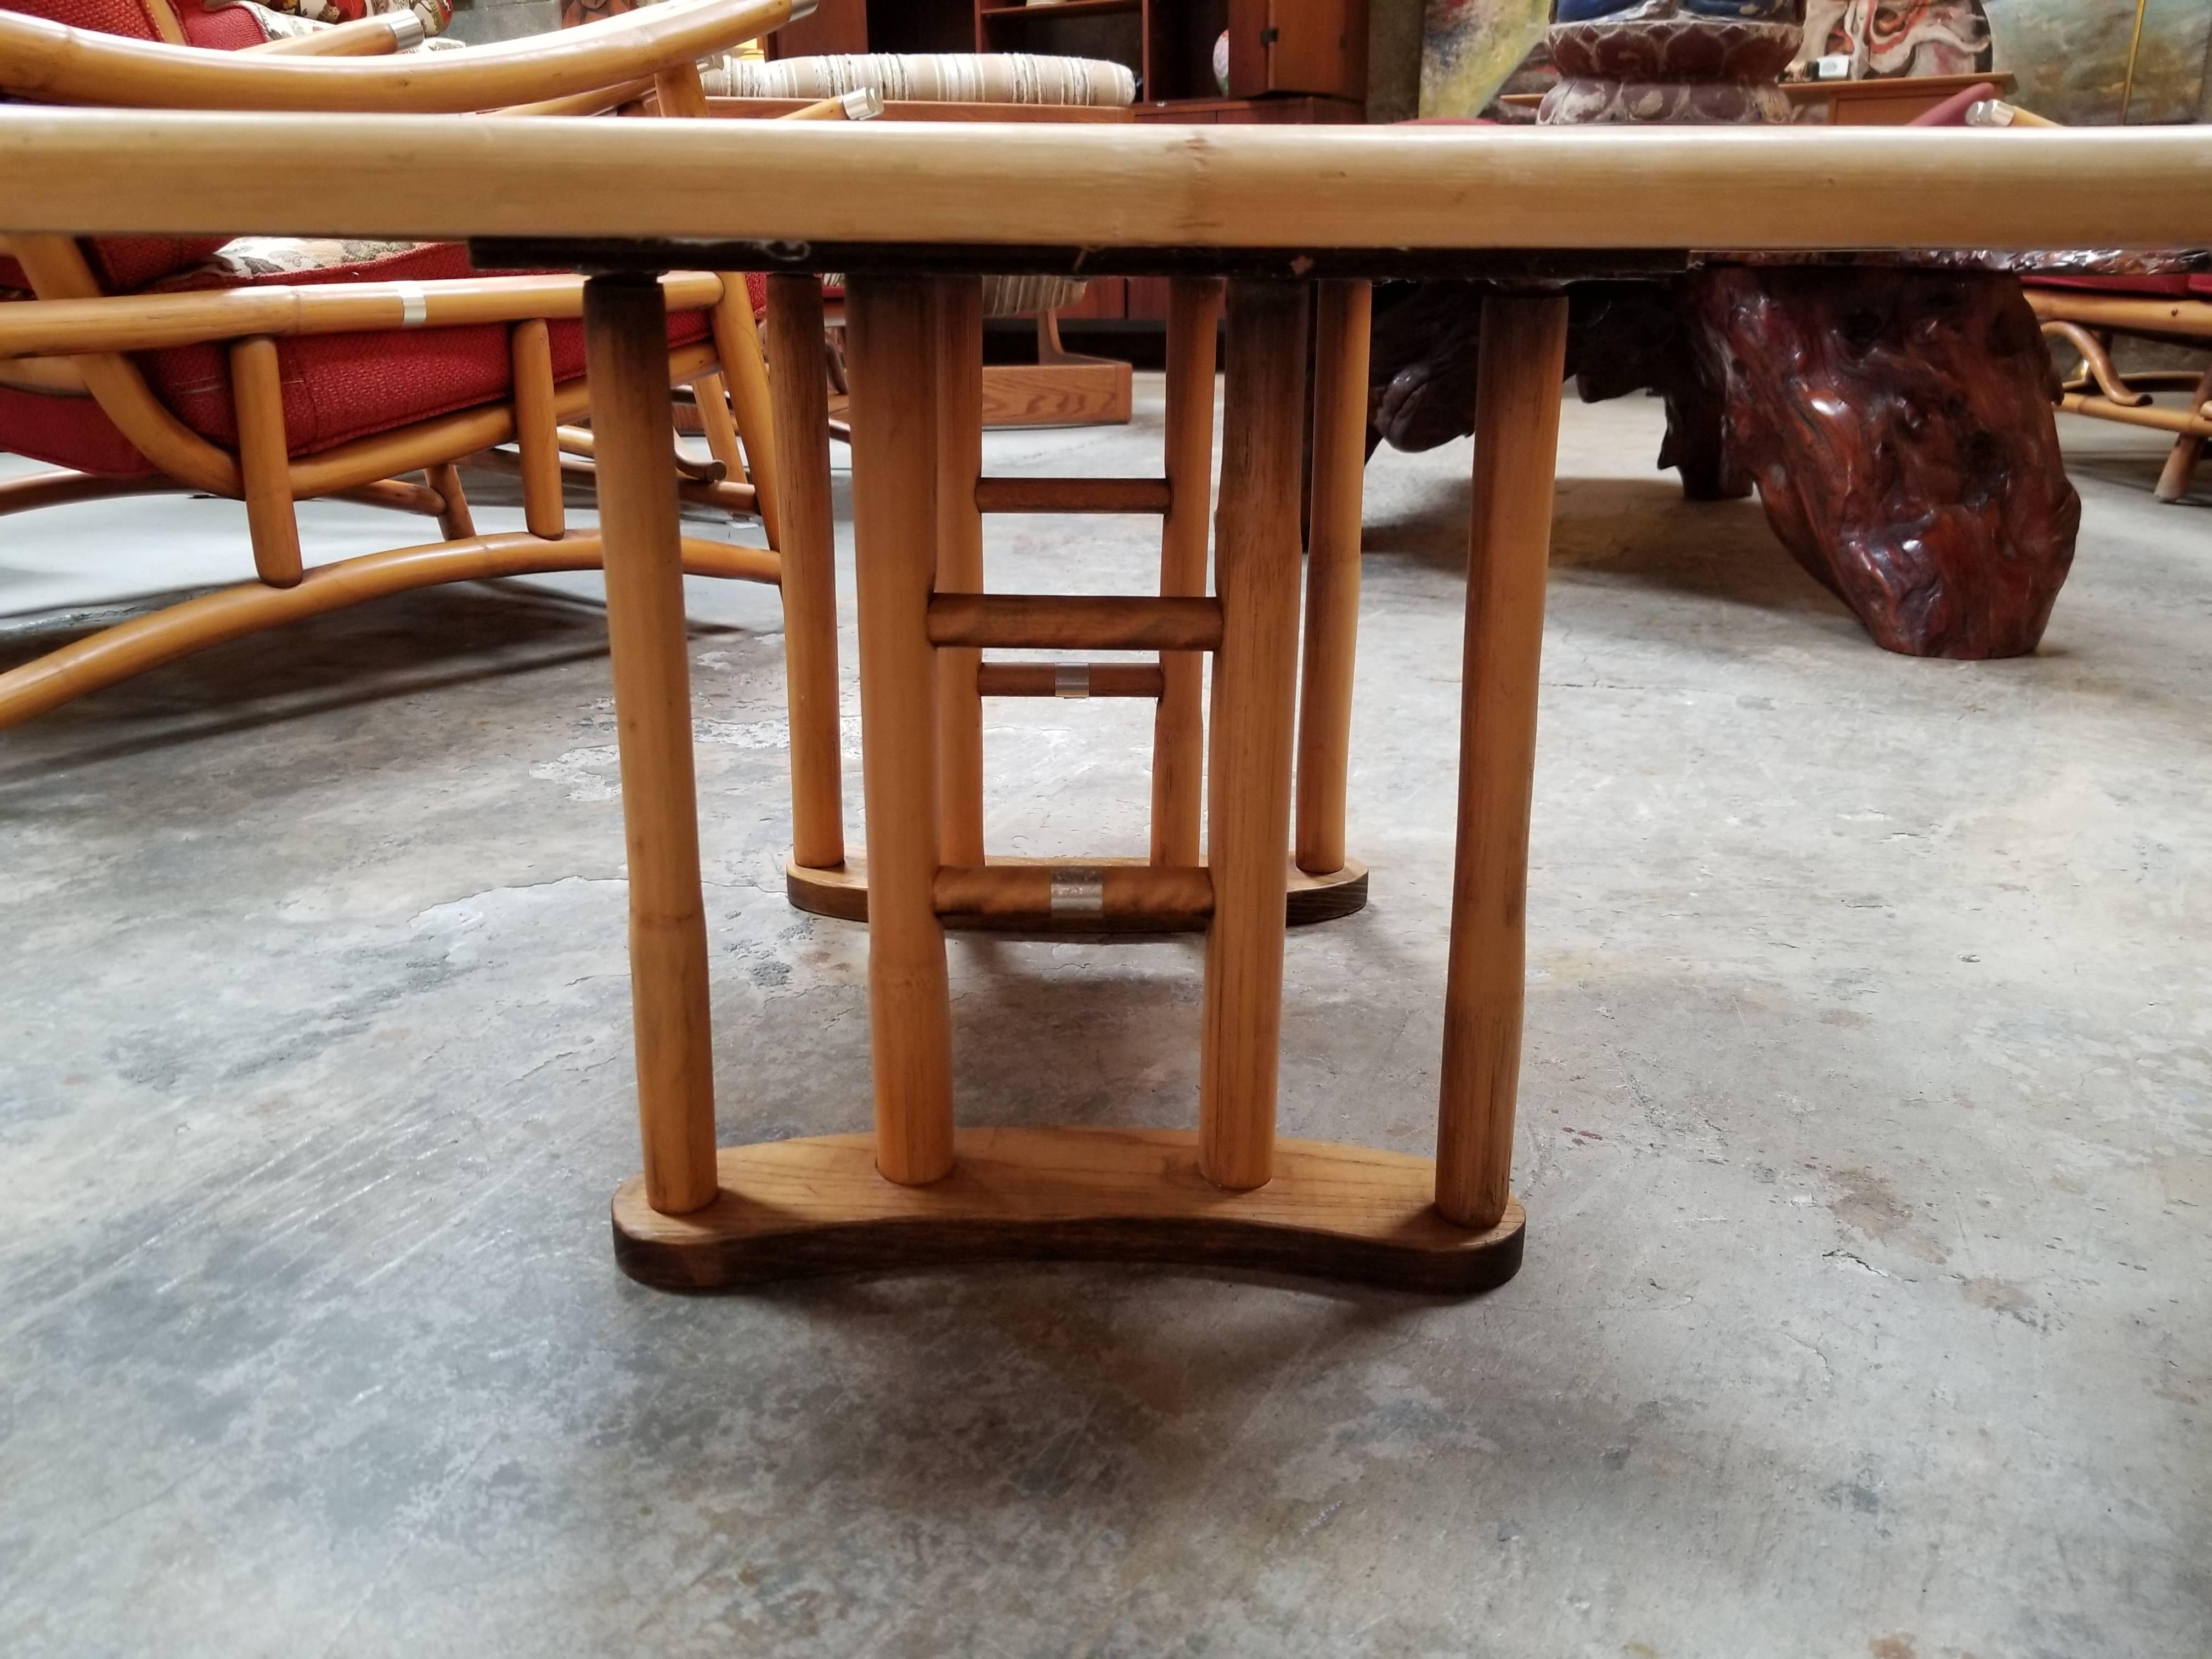 Pair of Rattan End Tables In Excellent Condition For Sale In Fulton, CA